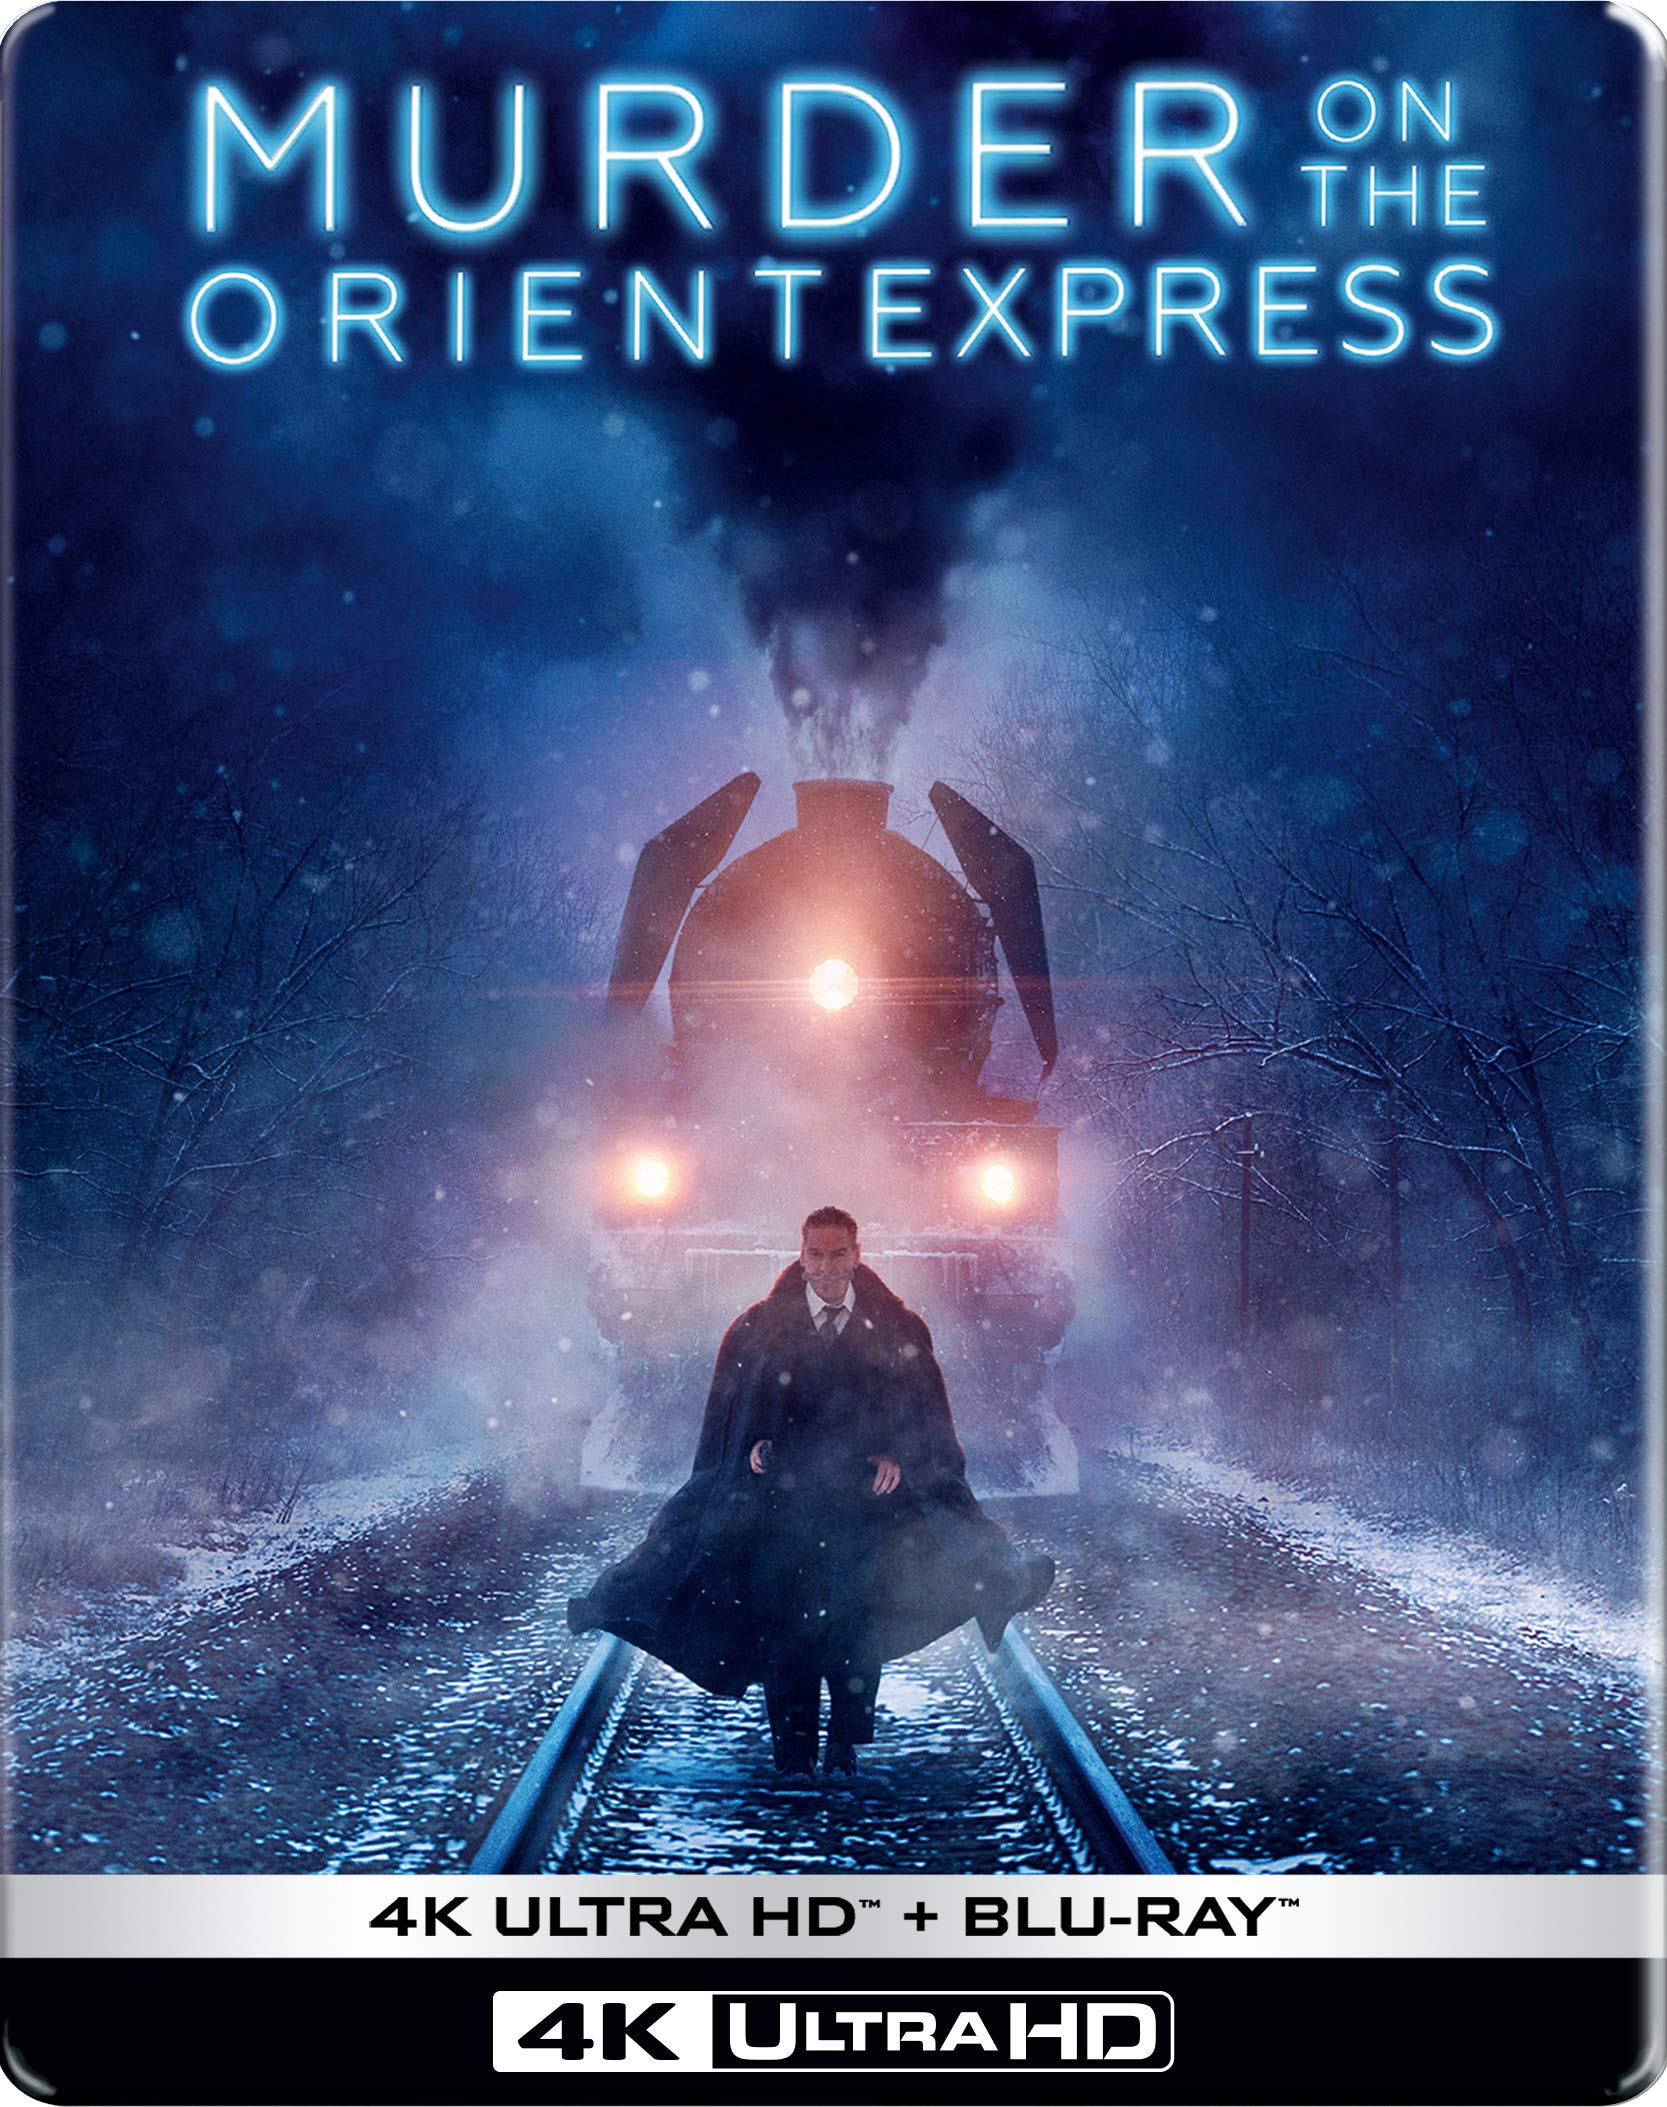 murder-on-the-orient-express-4k-ultra-hd-full-hd-blu-ray-2-disc-limited-edition-steelbook